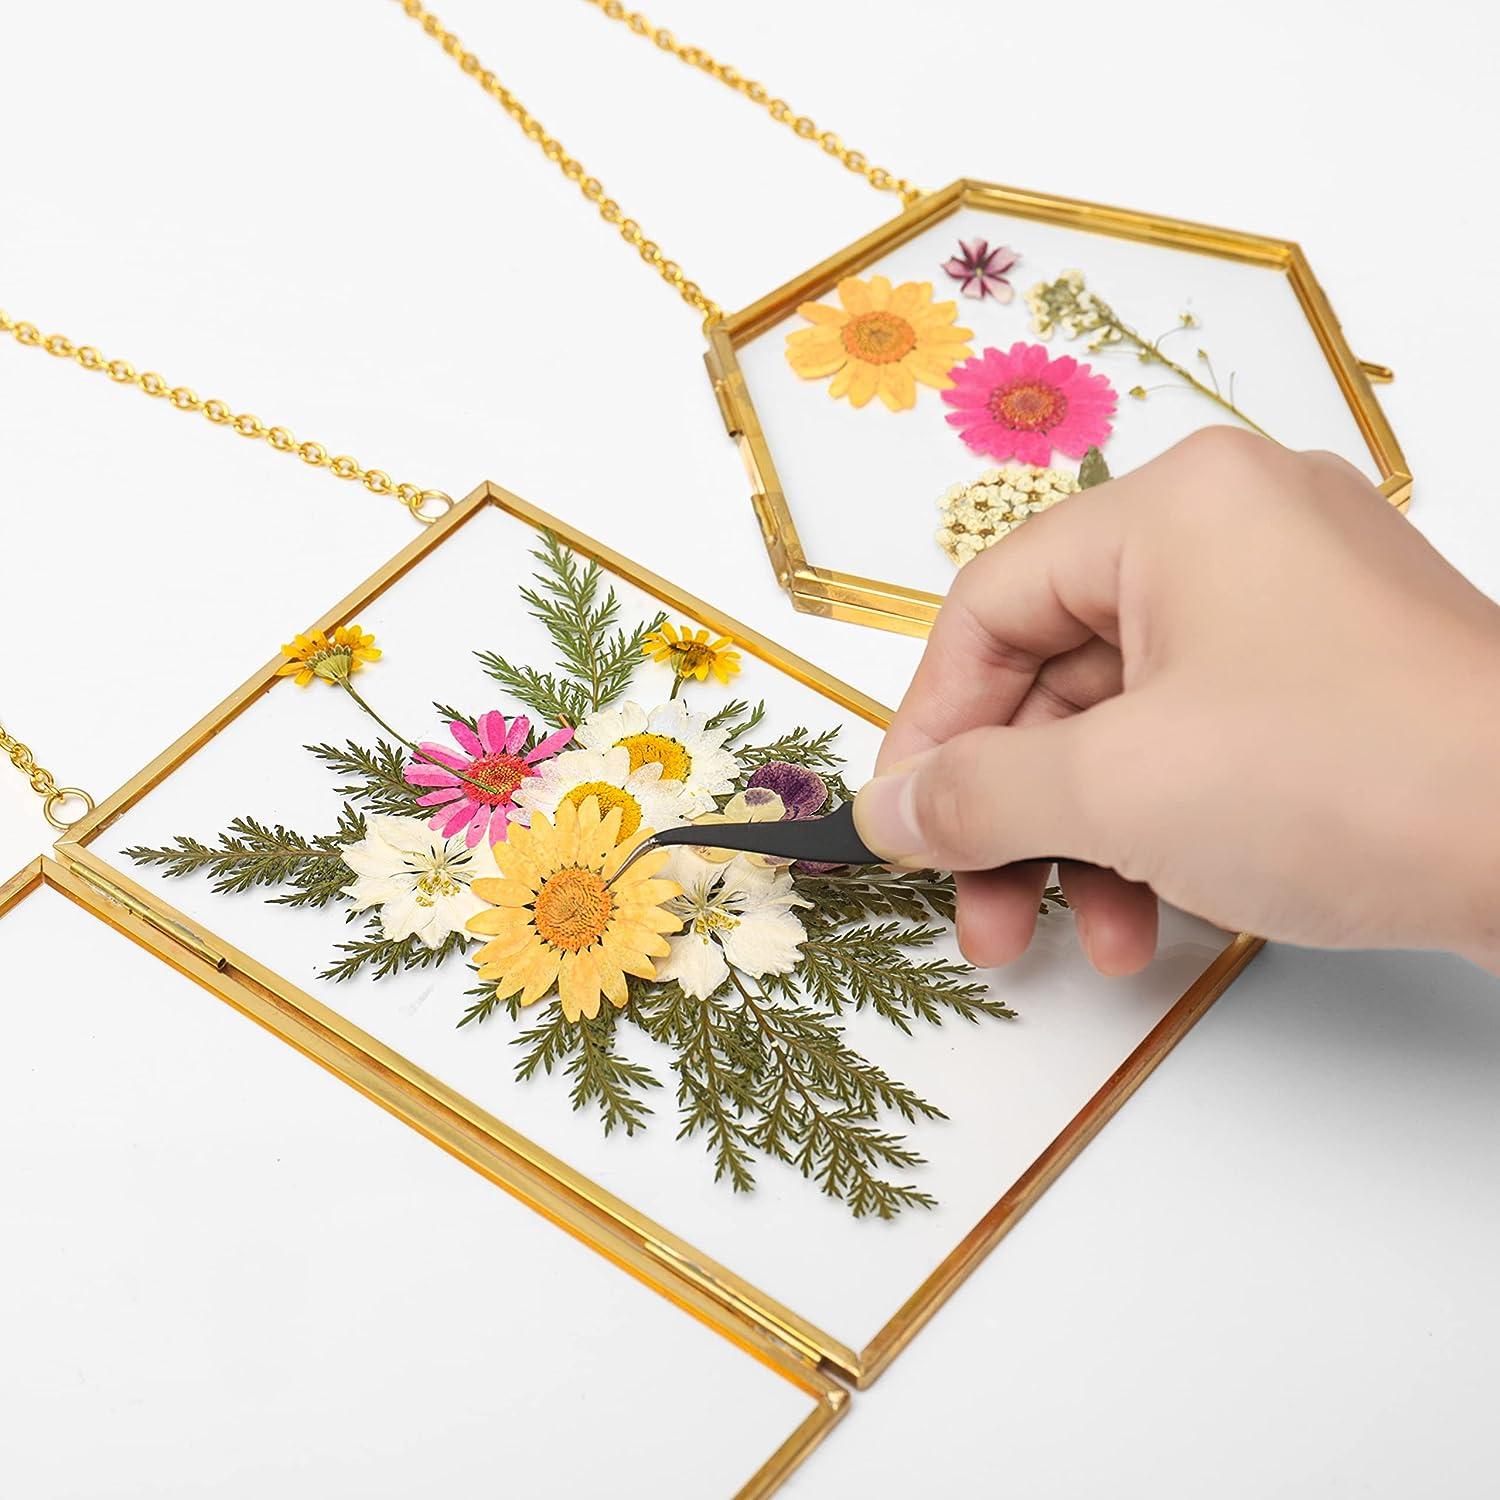 Double Glass Frame for Pressed Flowers - w/Real Dried Flowers and Tweezer - Pressed  Flower Frames for Handicrafts Pressed Flower Photo or Other Small Flat Items